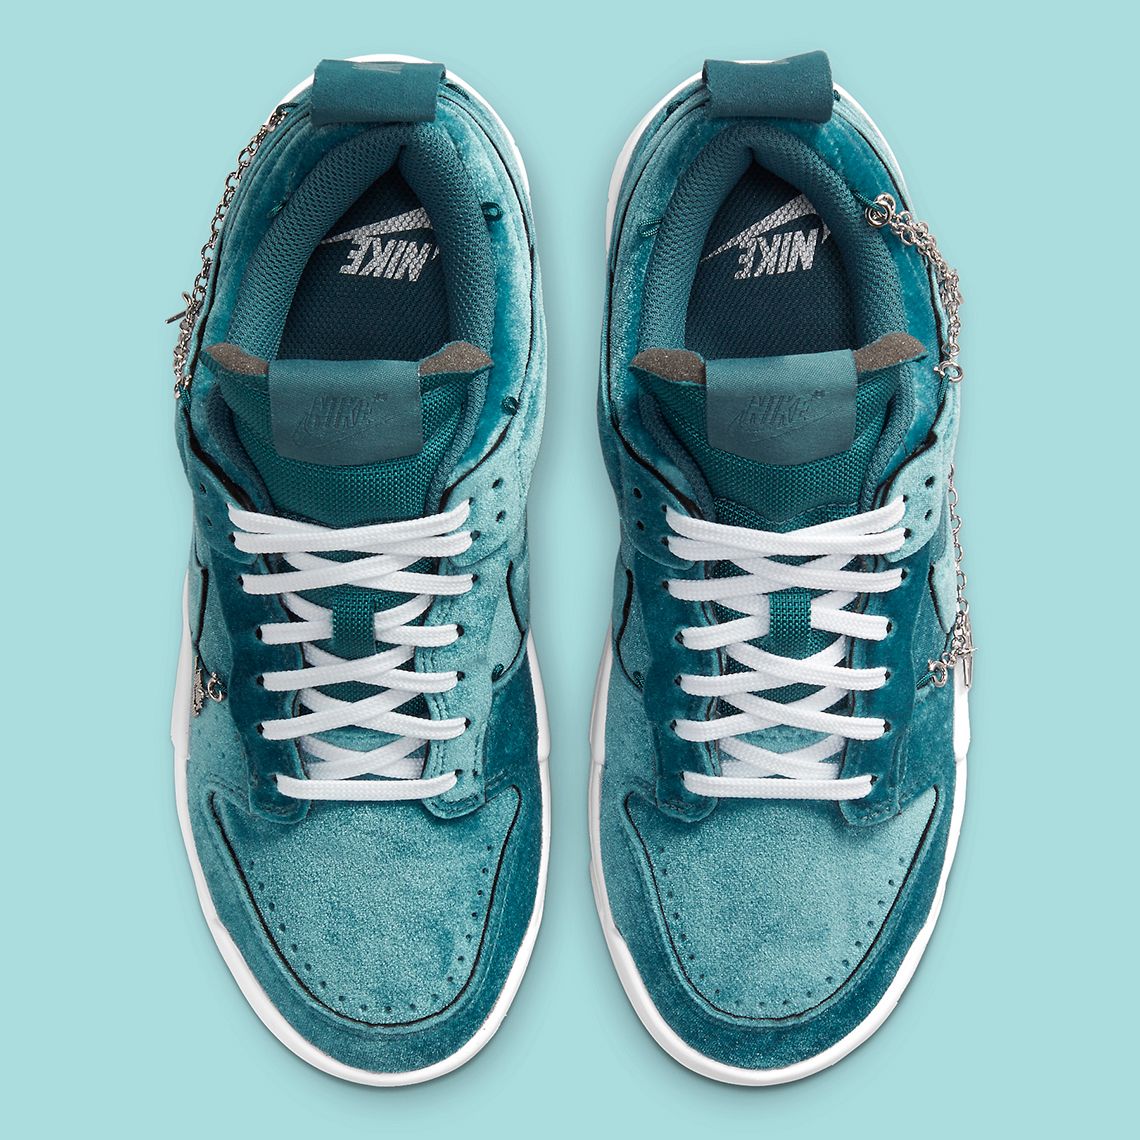 toa-to-bow-nike-dunk-low-disrupt-blue-velvet